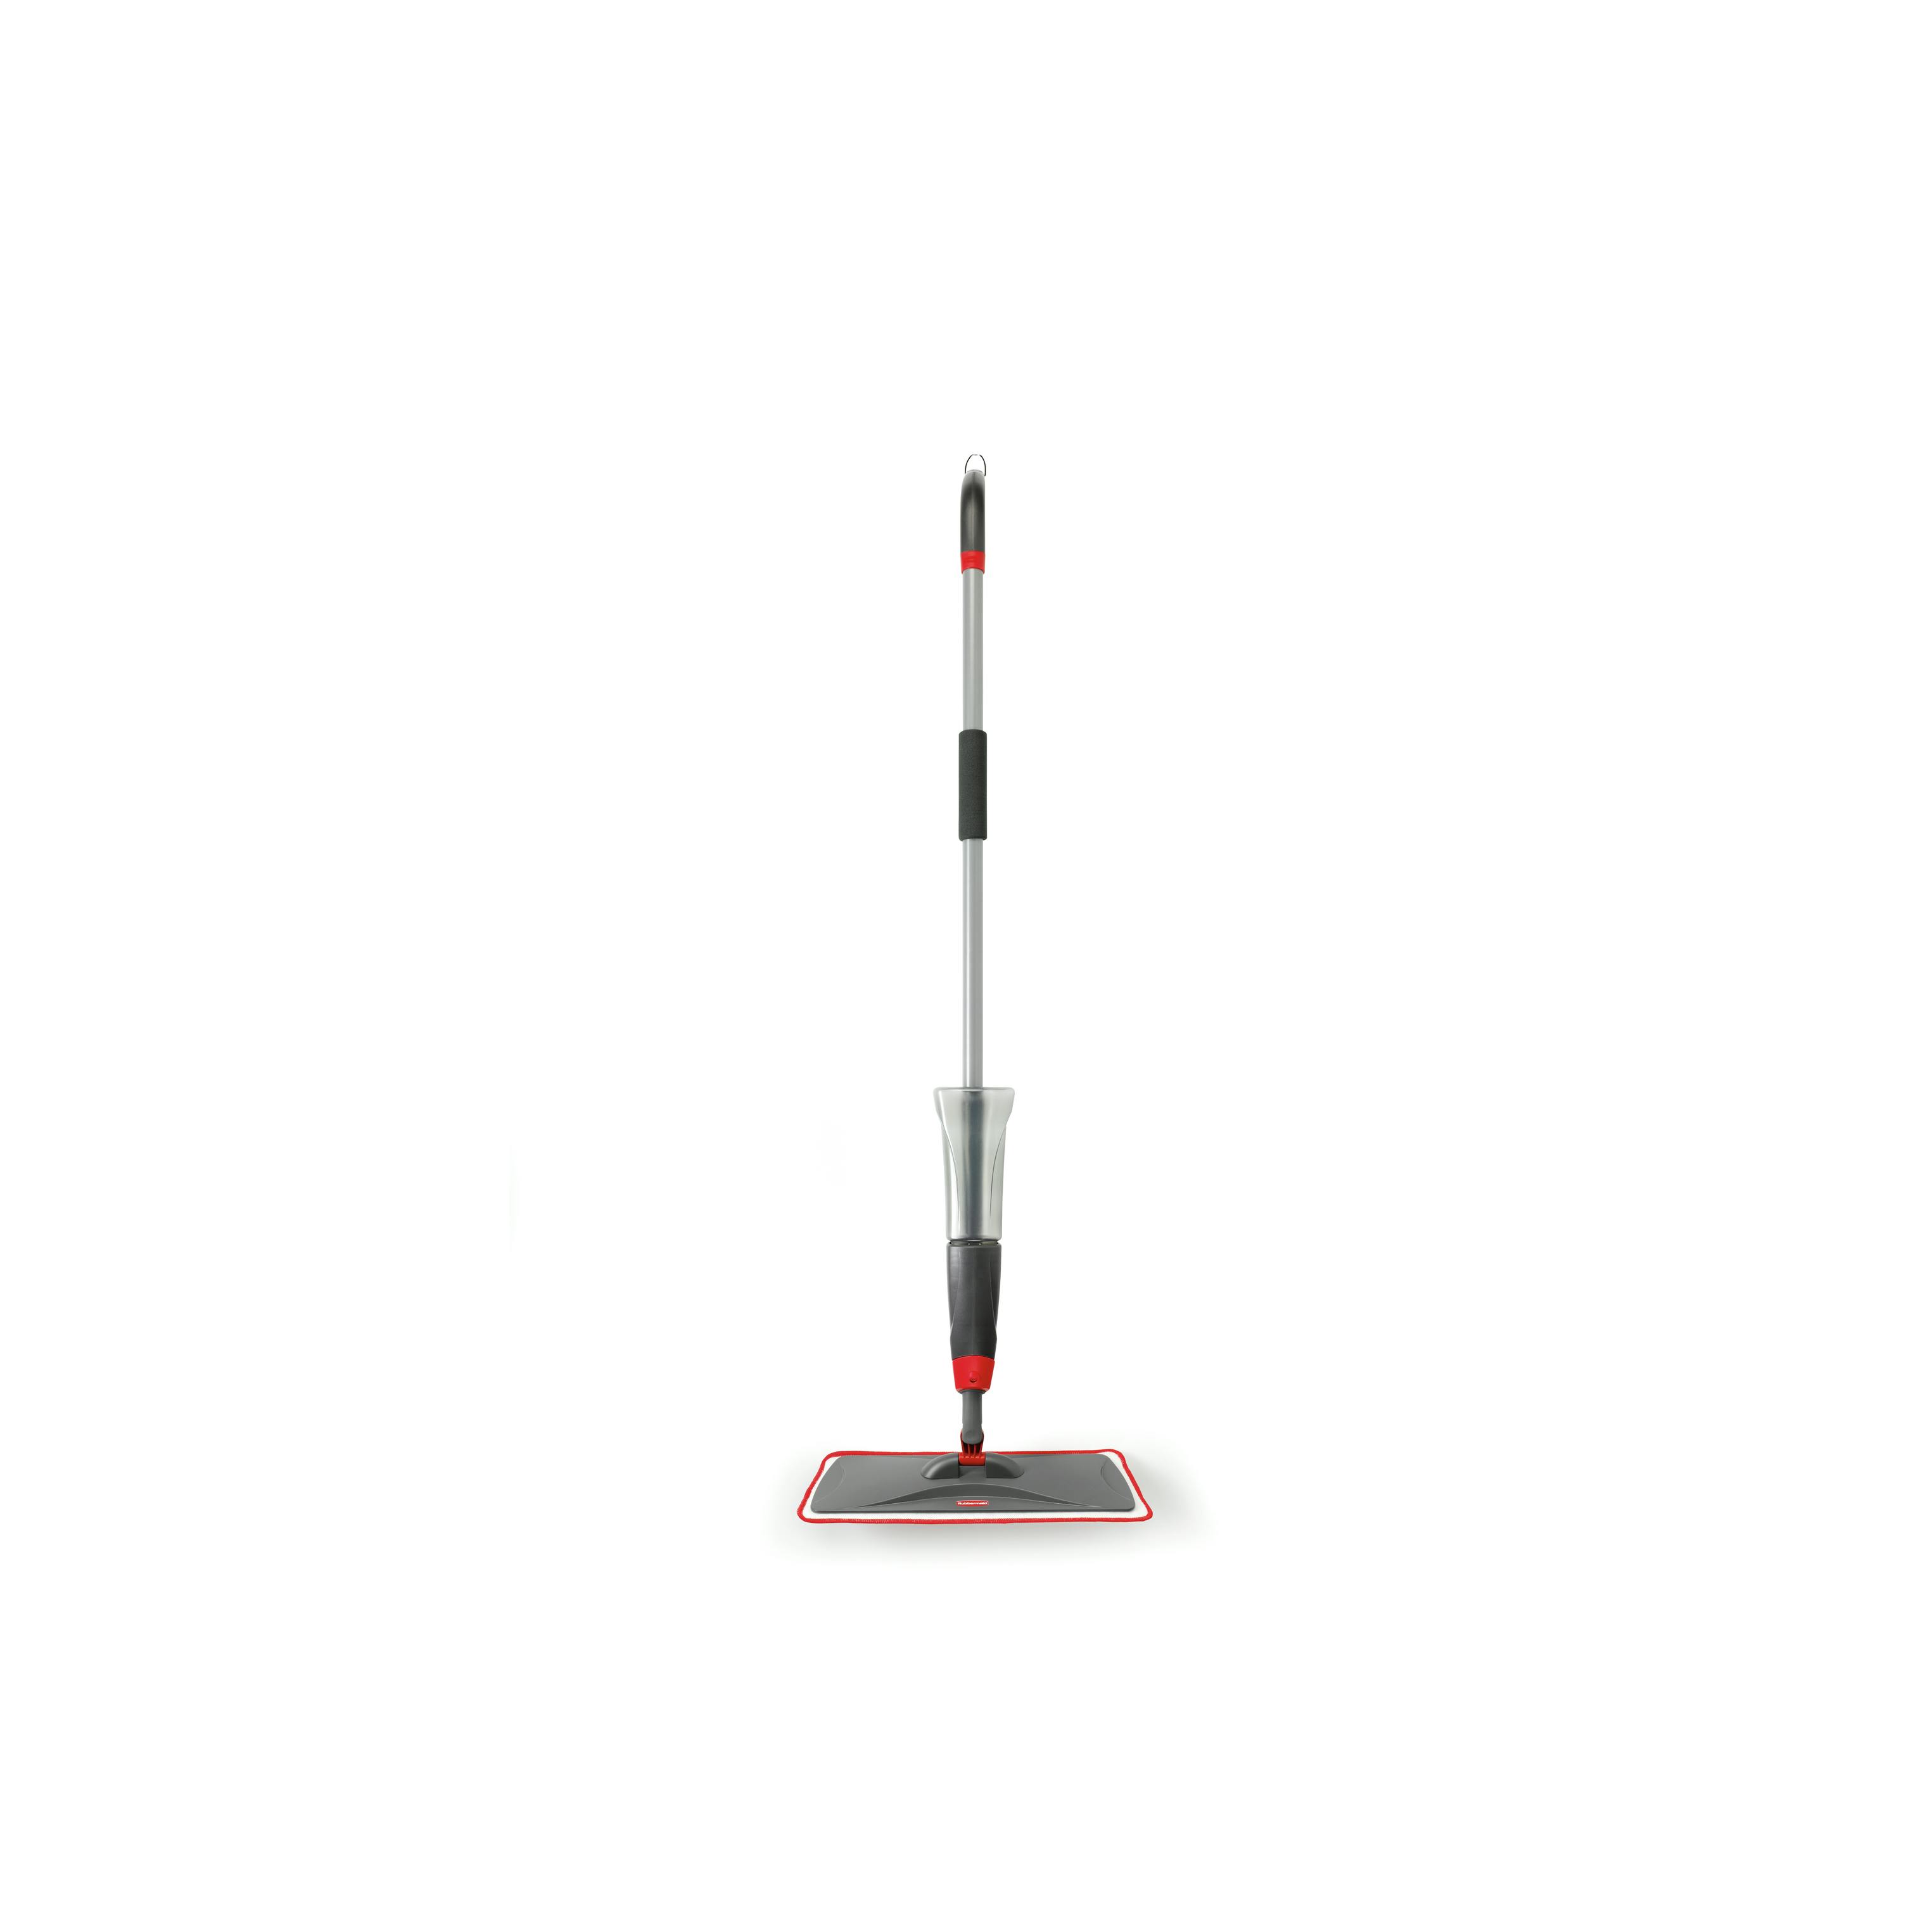 Rubbermaid Reveal Spray Mop with Reusable Microfibre Mop Pad